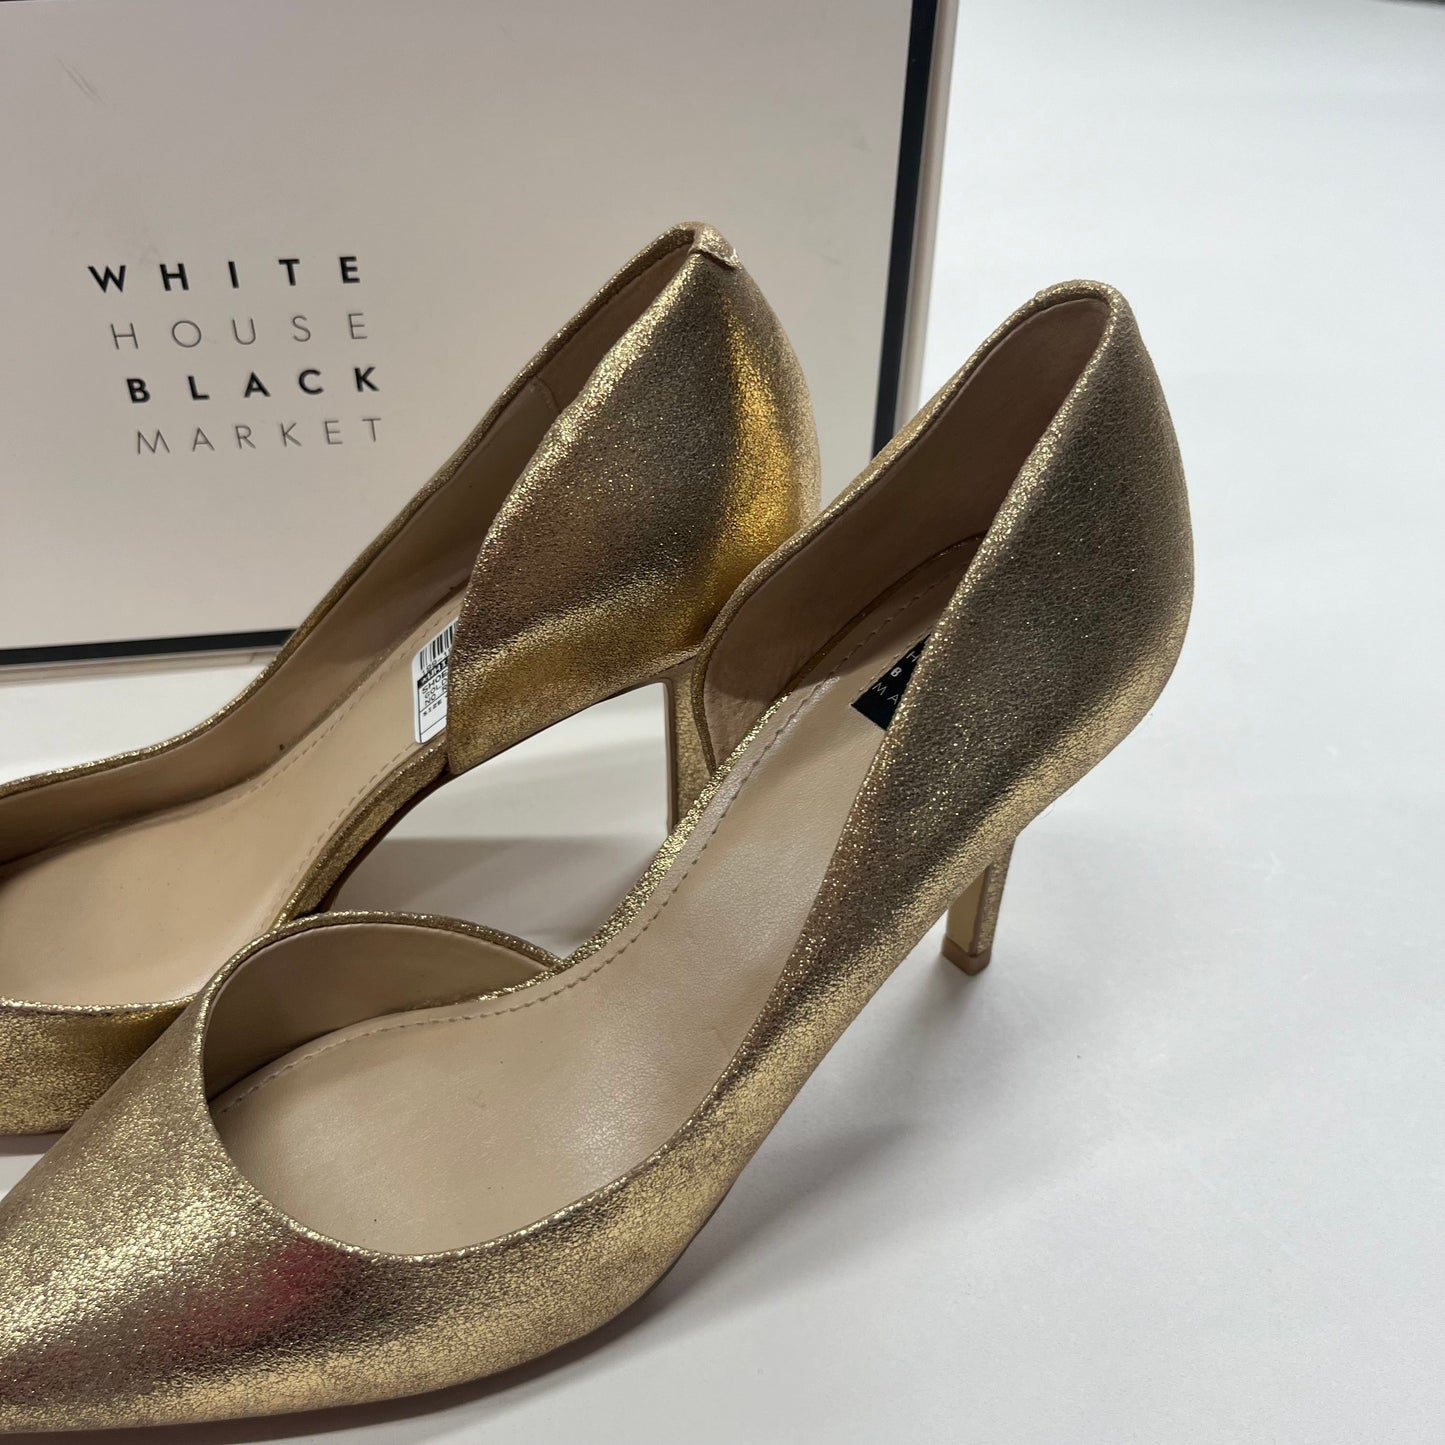 Gold Shoes Heels D Orsay White House Black Market, Size 7